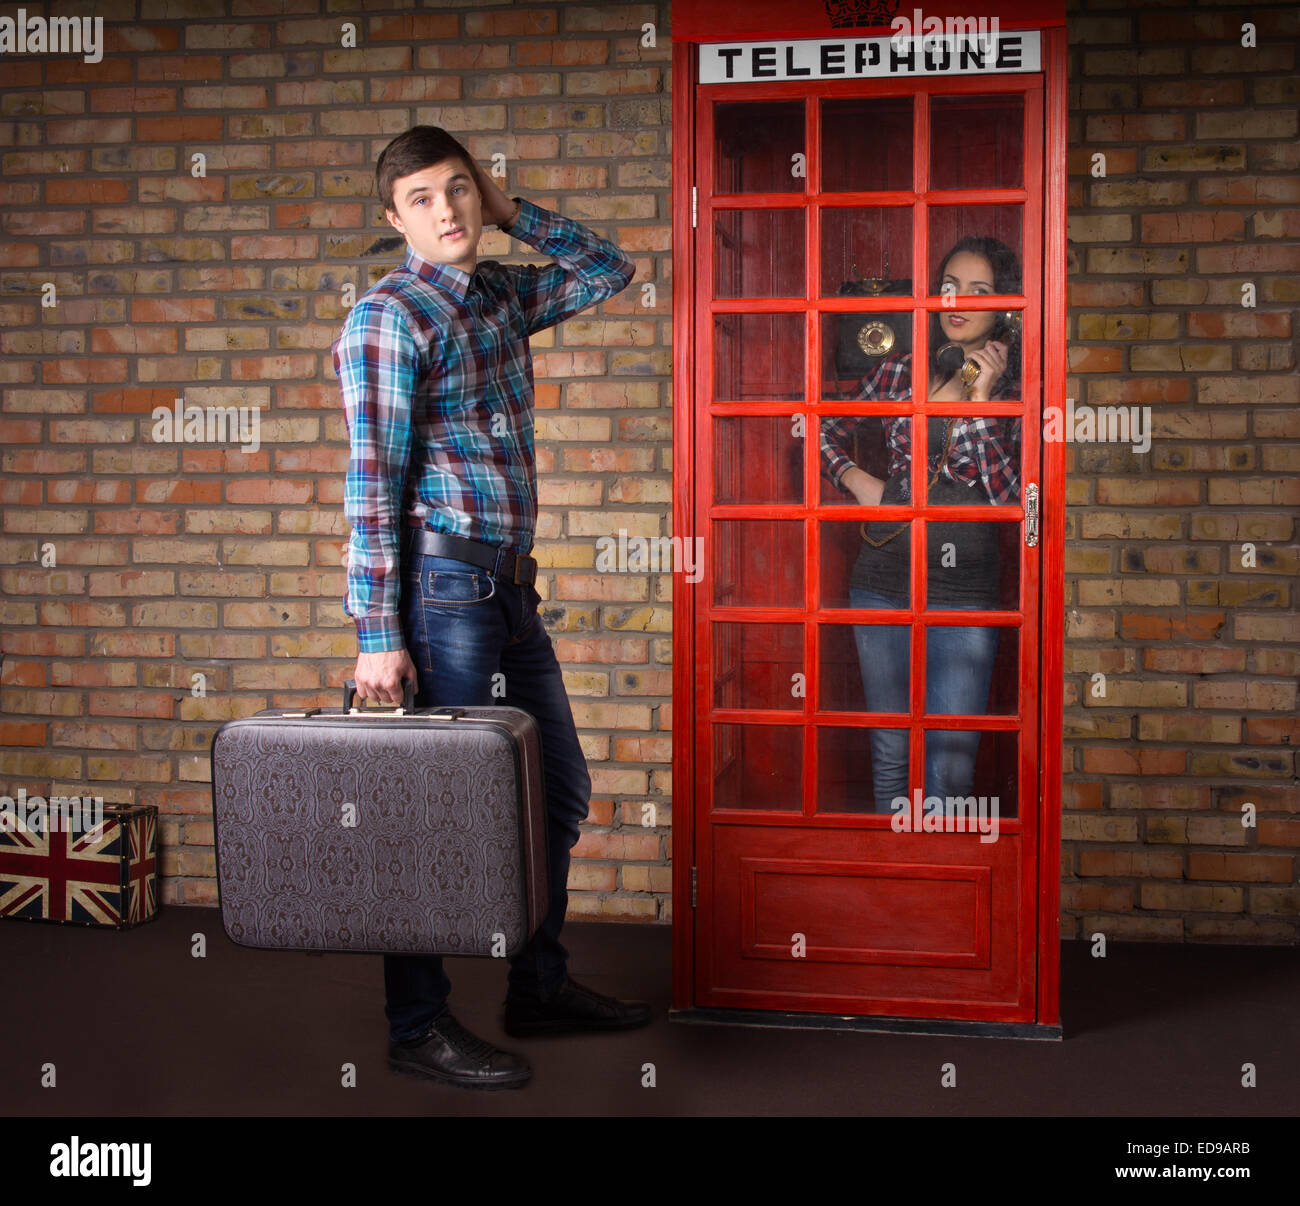 Young Handsome Man Carrying Suitcase Waiting at the Telephone Booth with Woman Using the Telephone Inside. Stock Photo